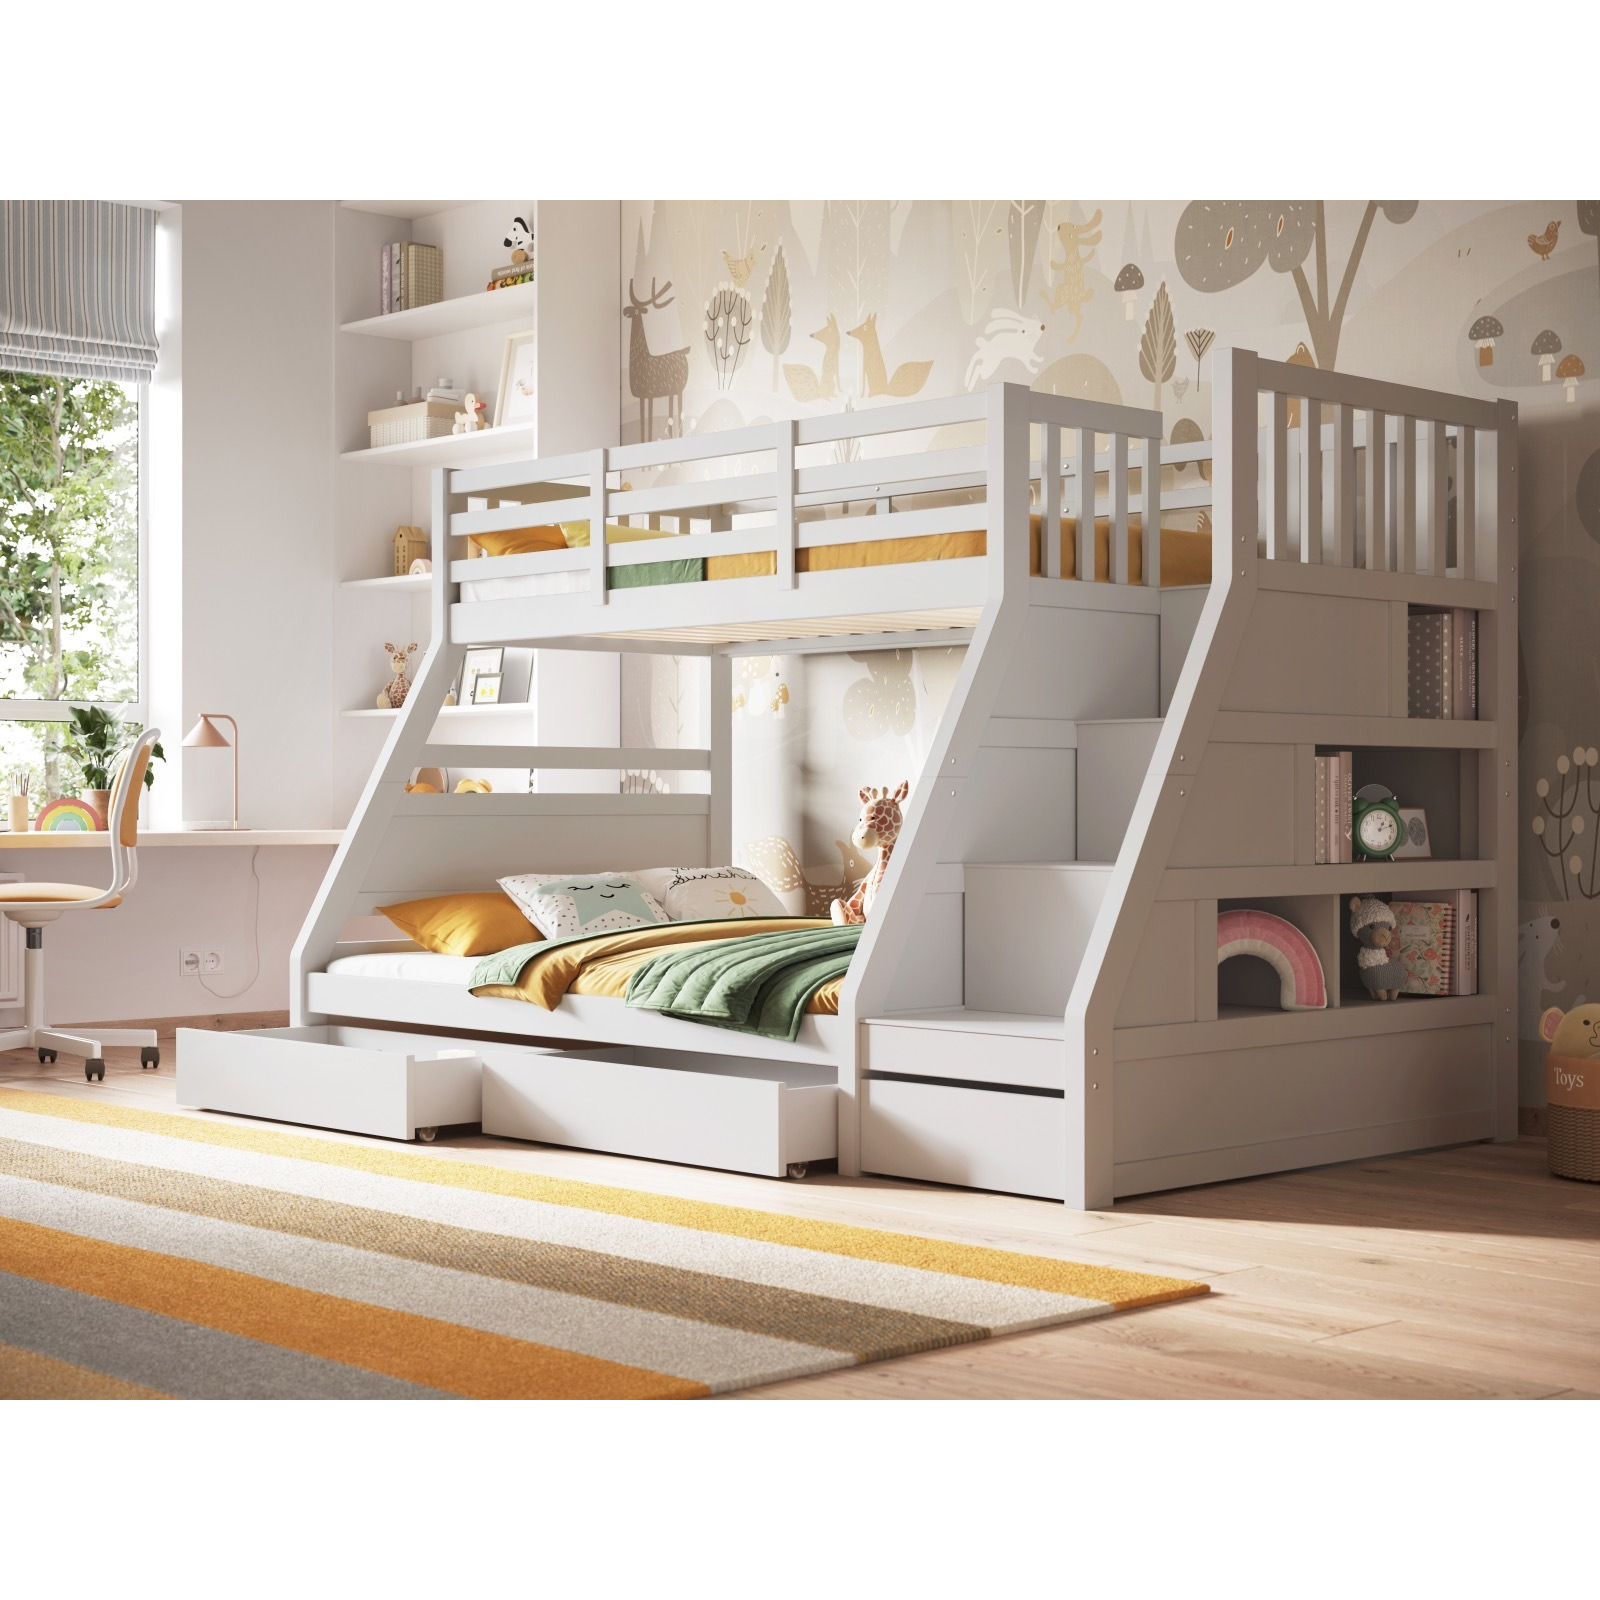 Flair Lunar Staircase Triple Bunk Bed with Shelves White - image 1